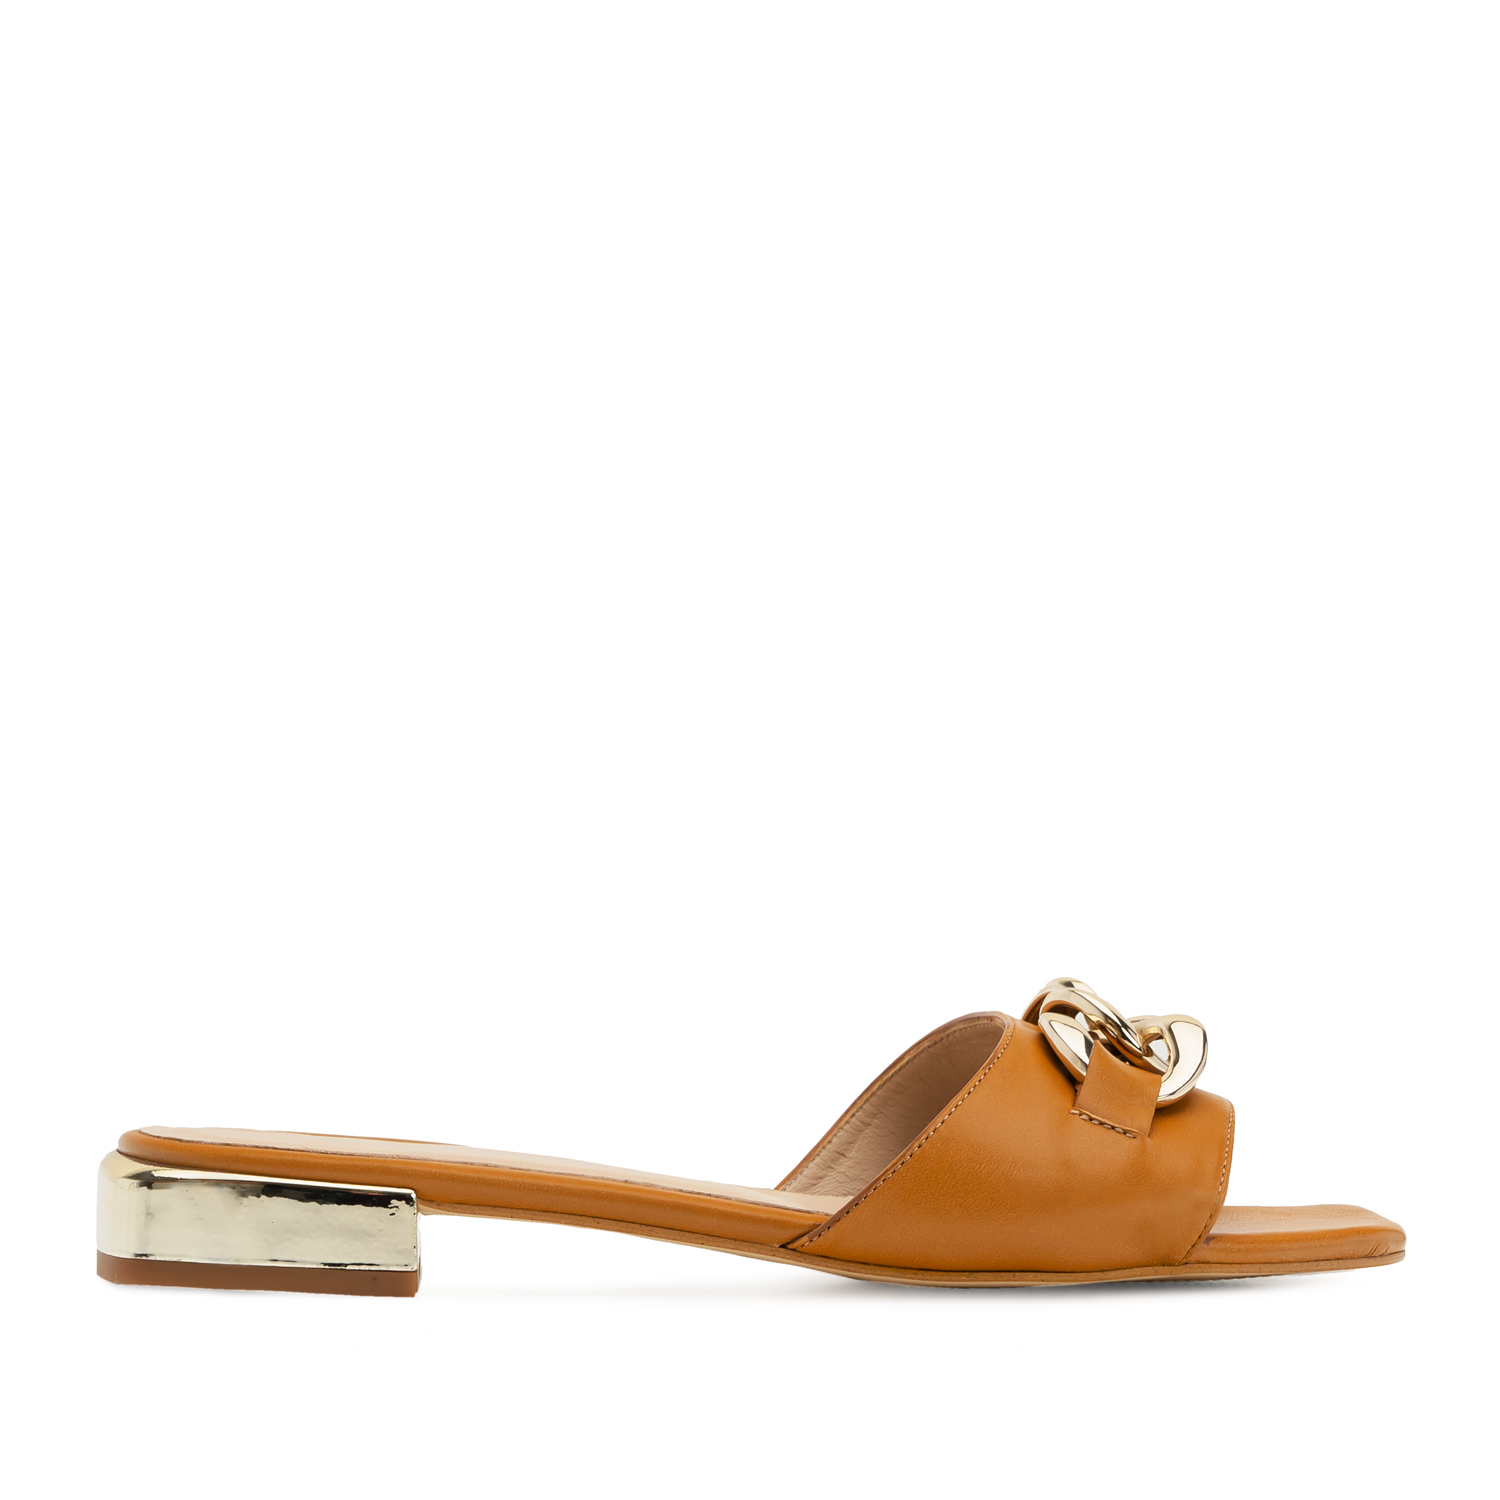 Flat Sandal in Camel Leather and Chain Detail 